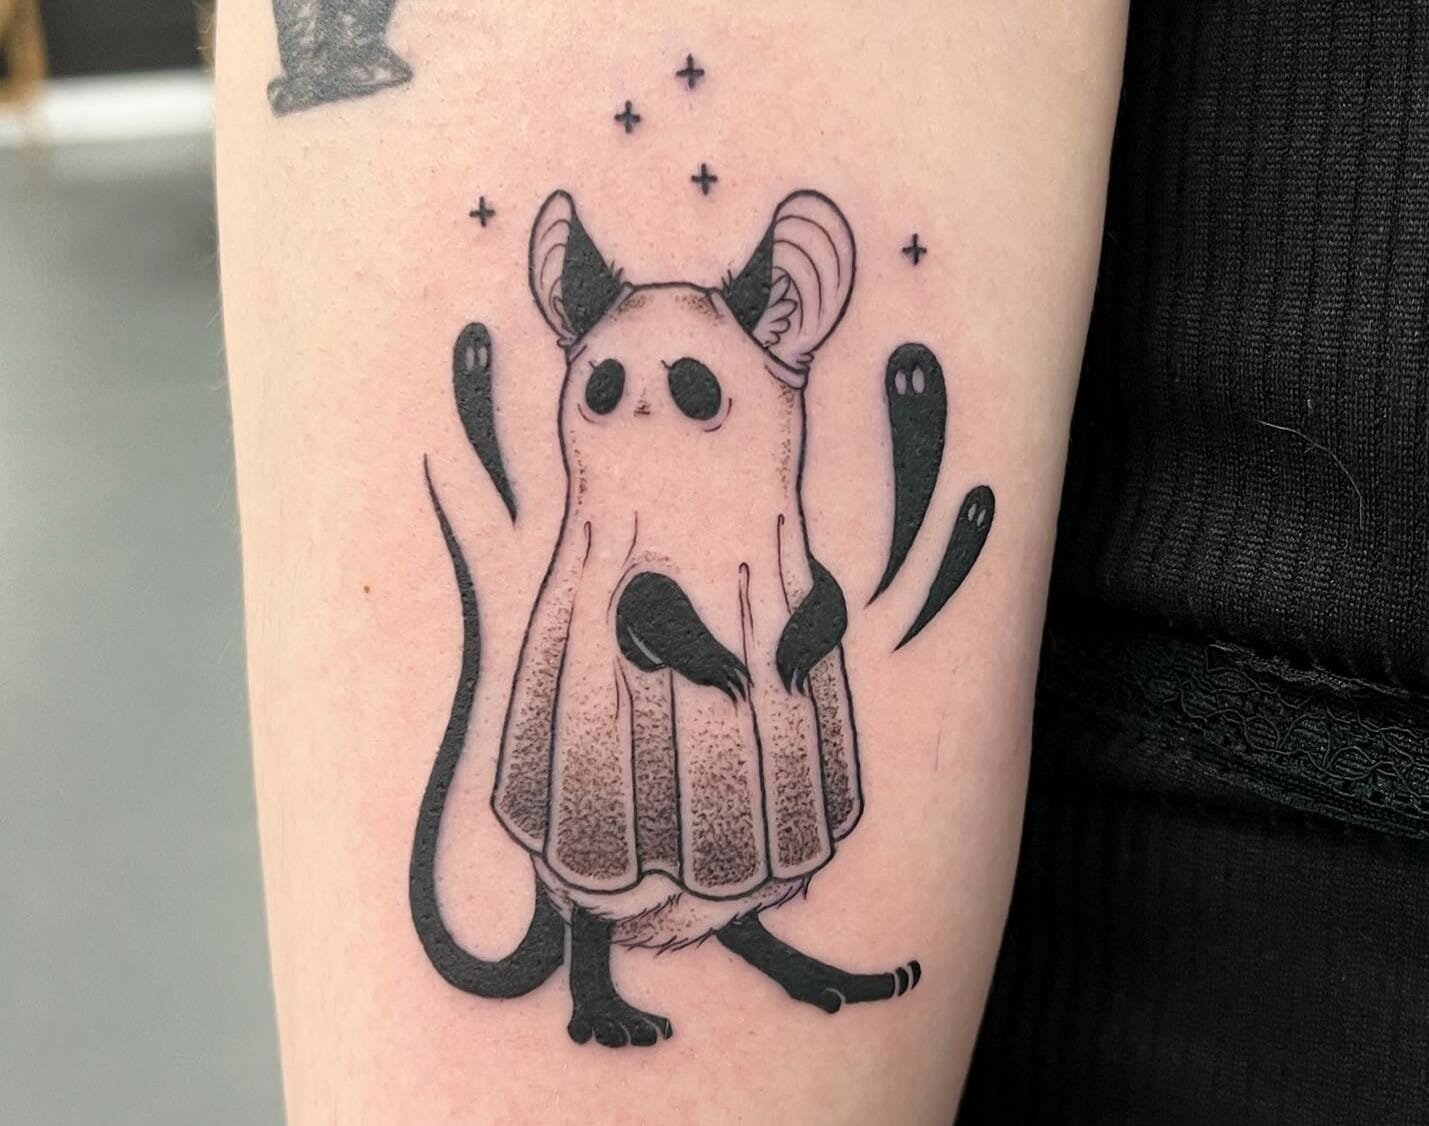 Minimalistic style ghost tattoo located on the inner